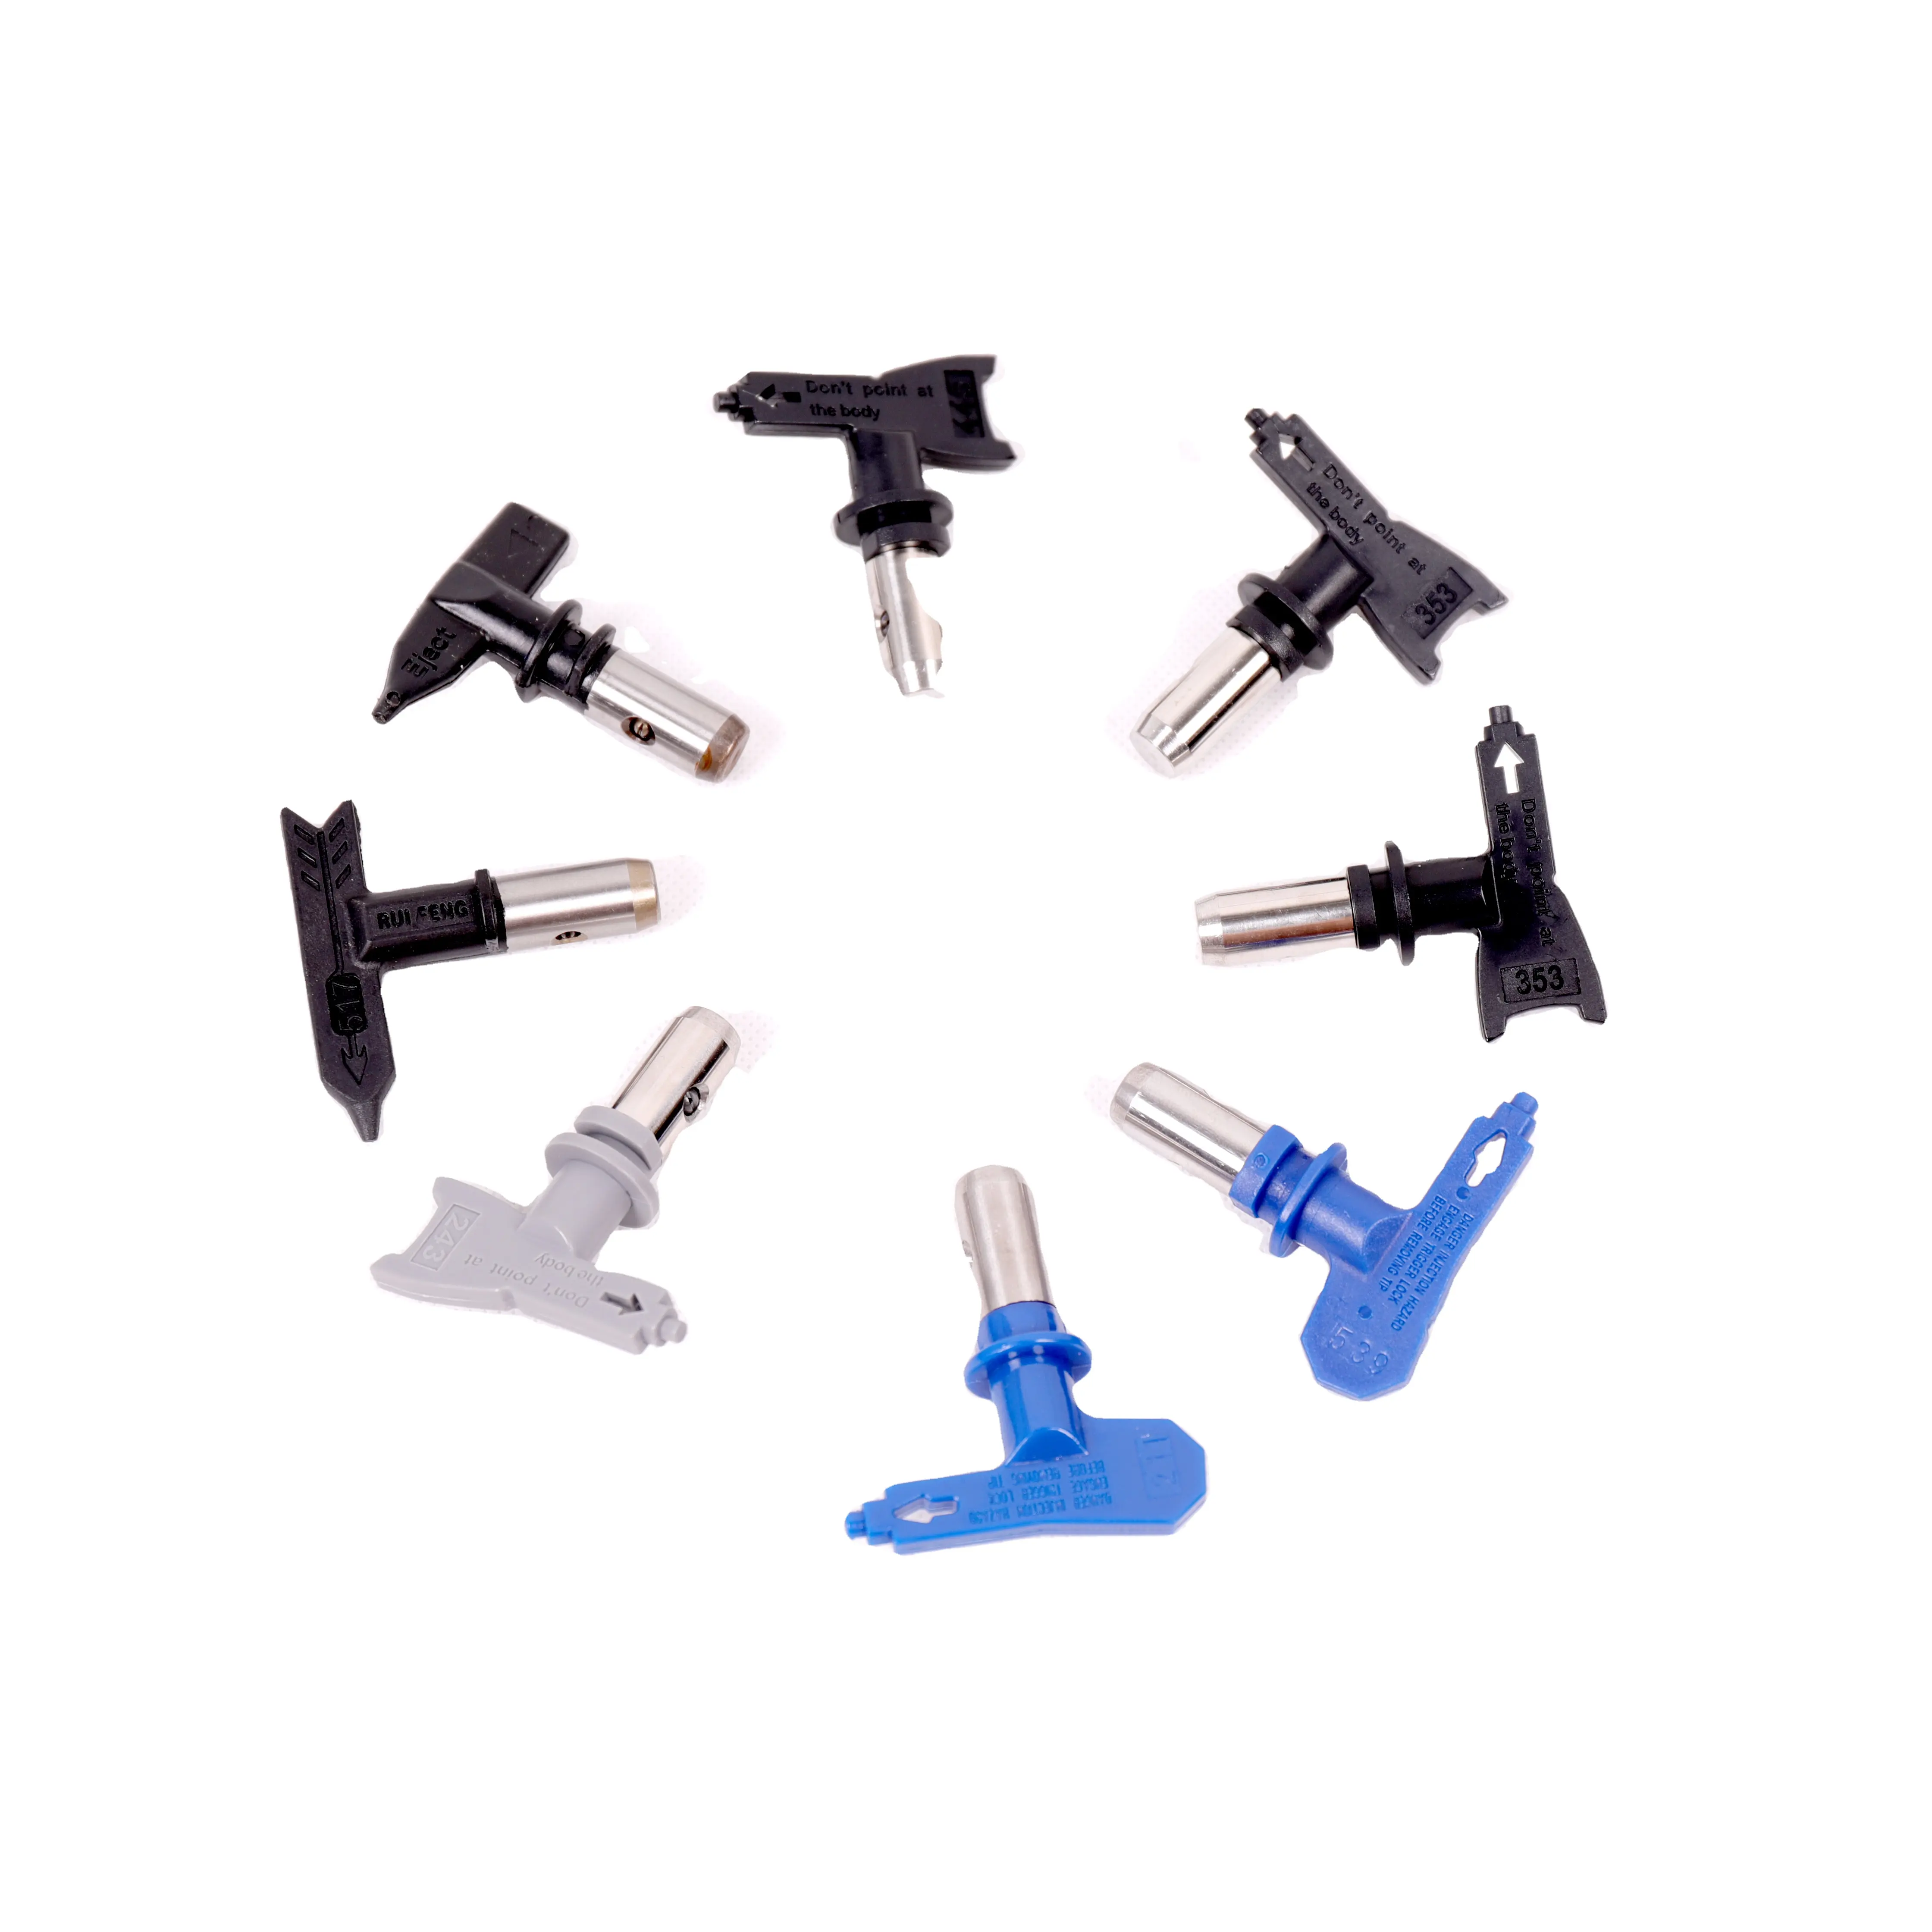 High quality airless tip and spray nozzle for airless paint sprayers